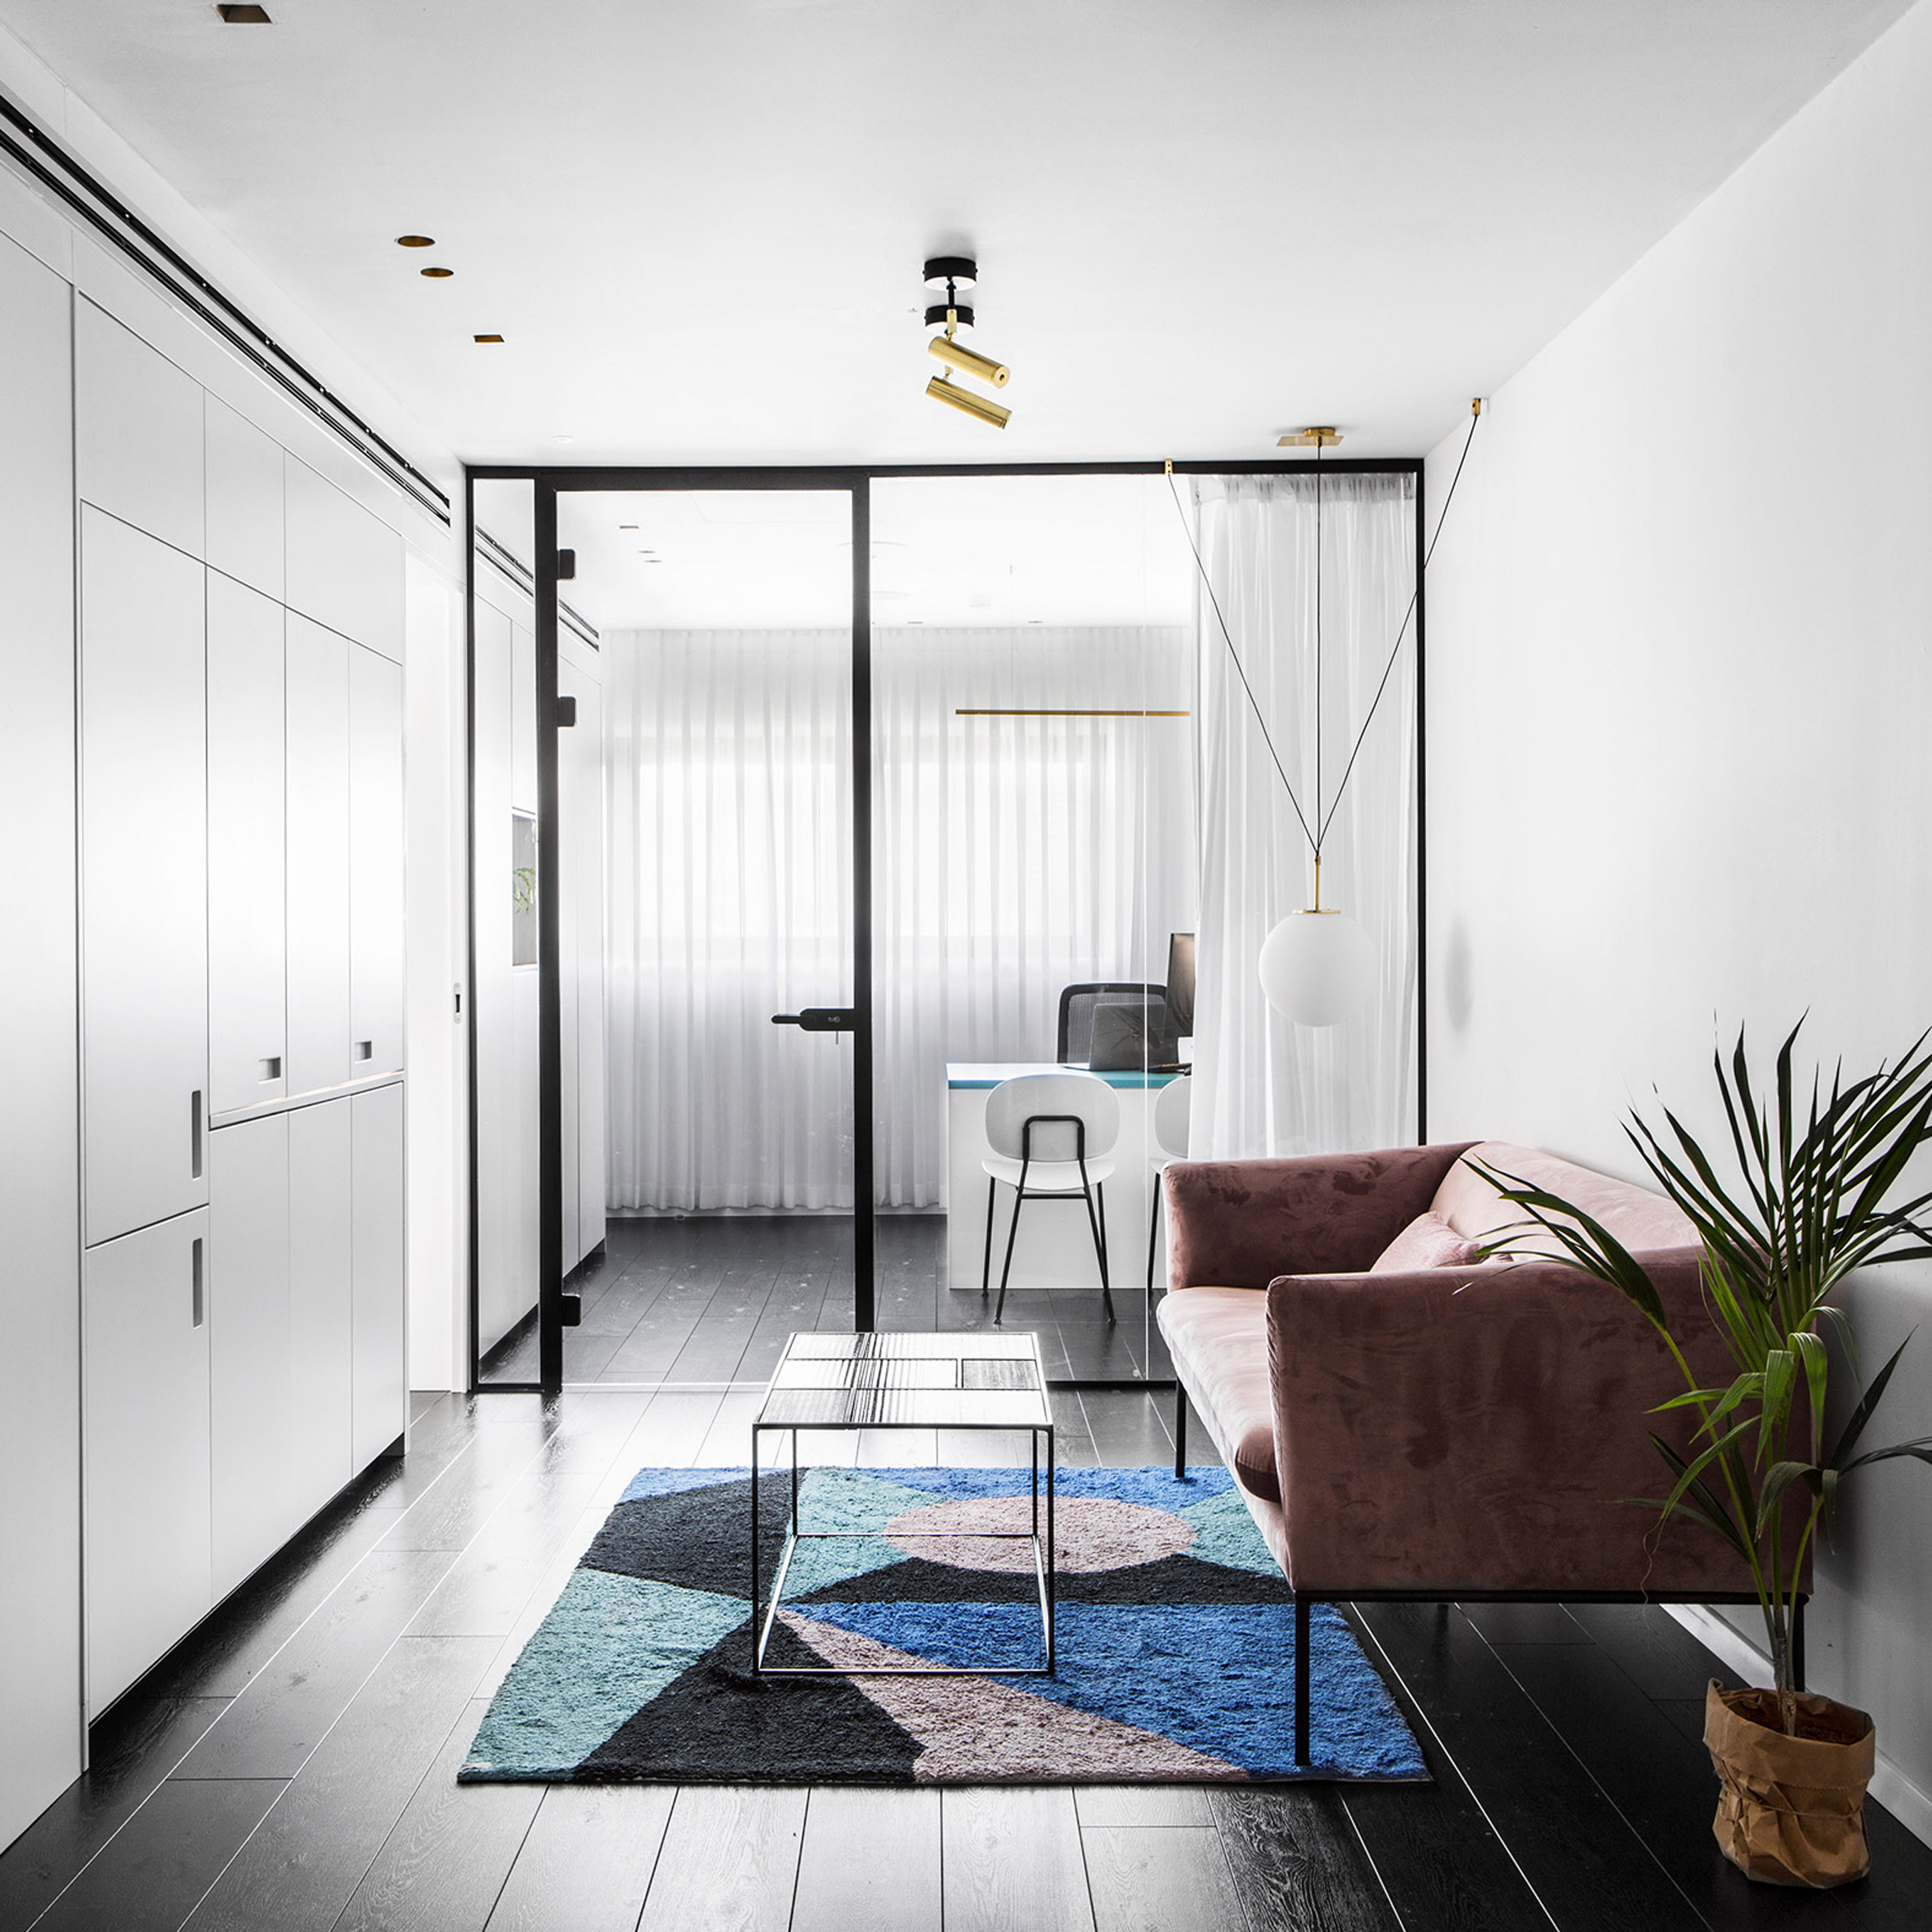 Maayan Zusman Designs Plastic Surgery Clinic With Home Like Interiors